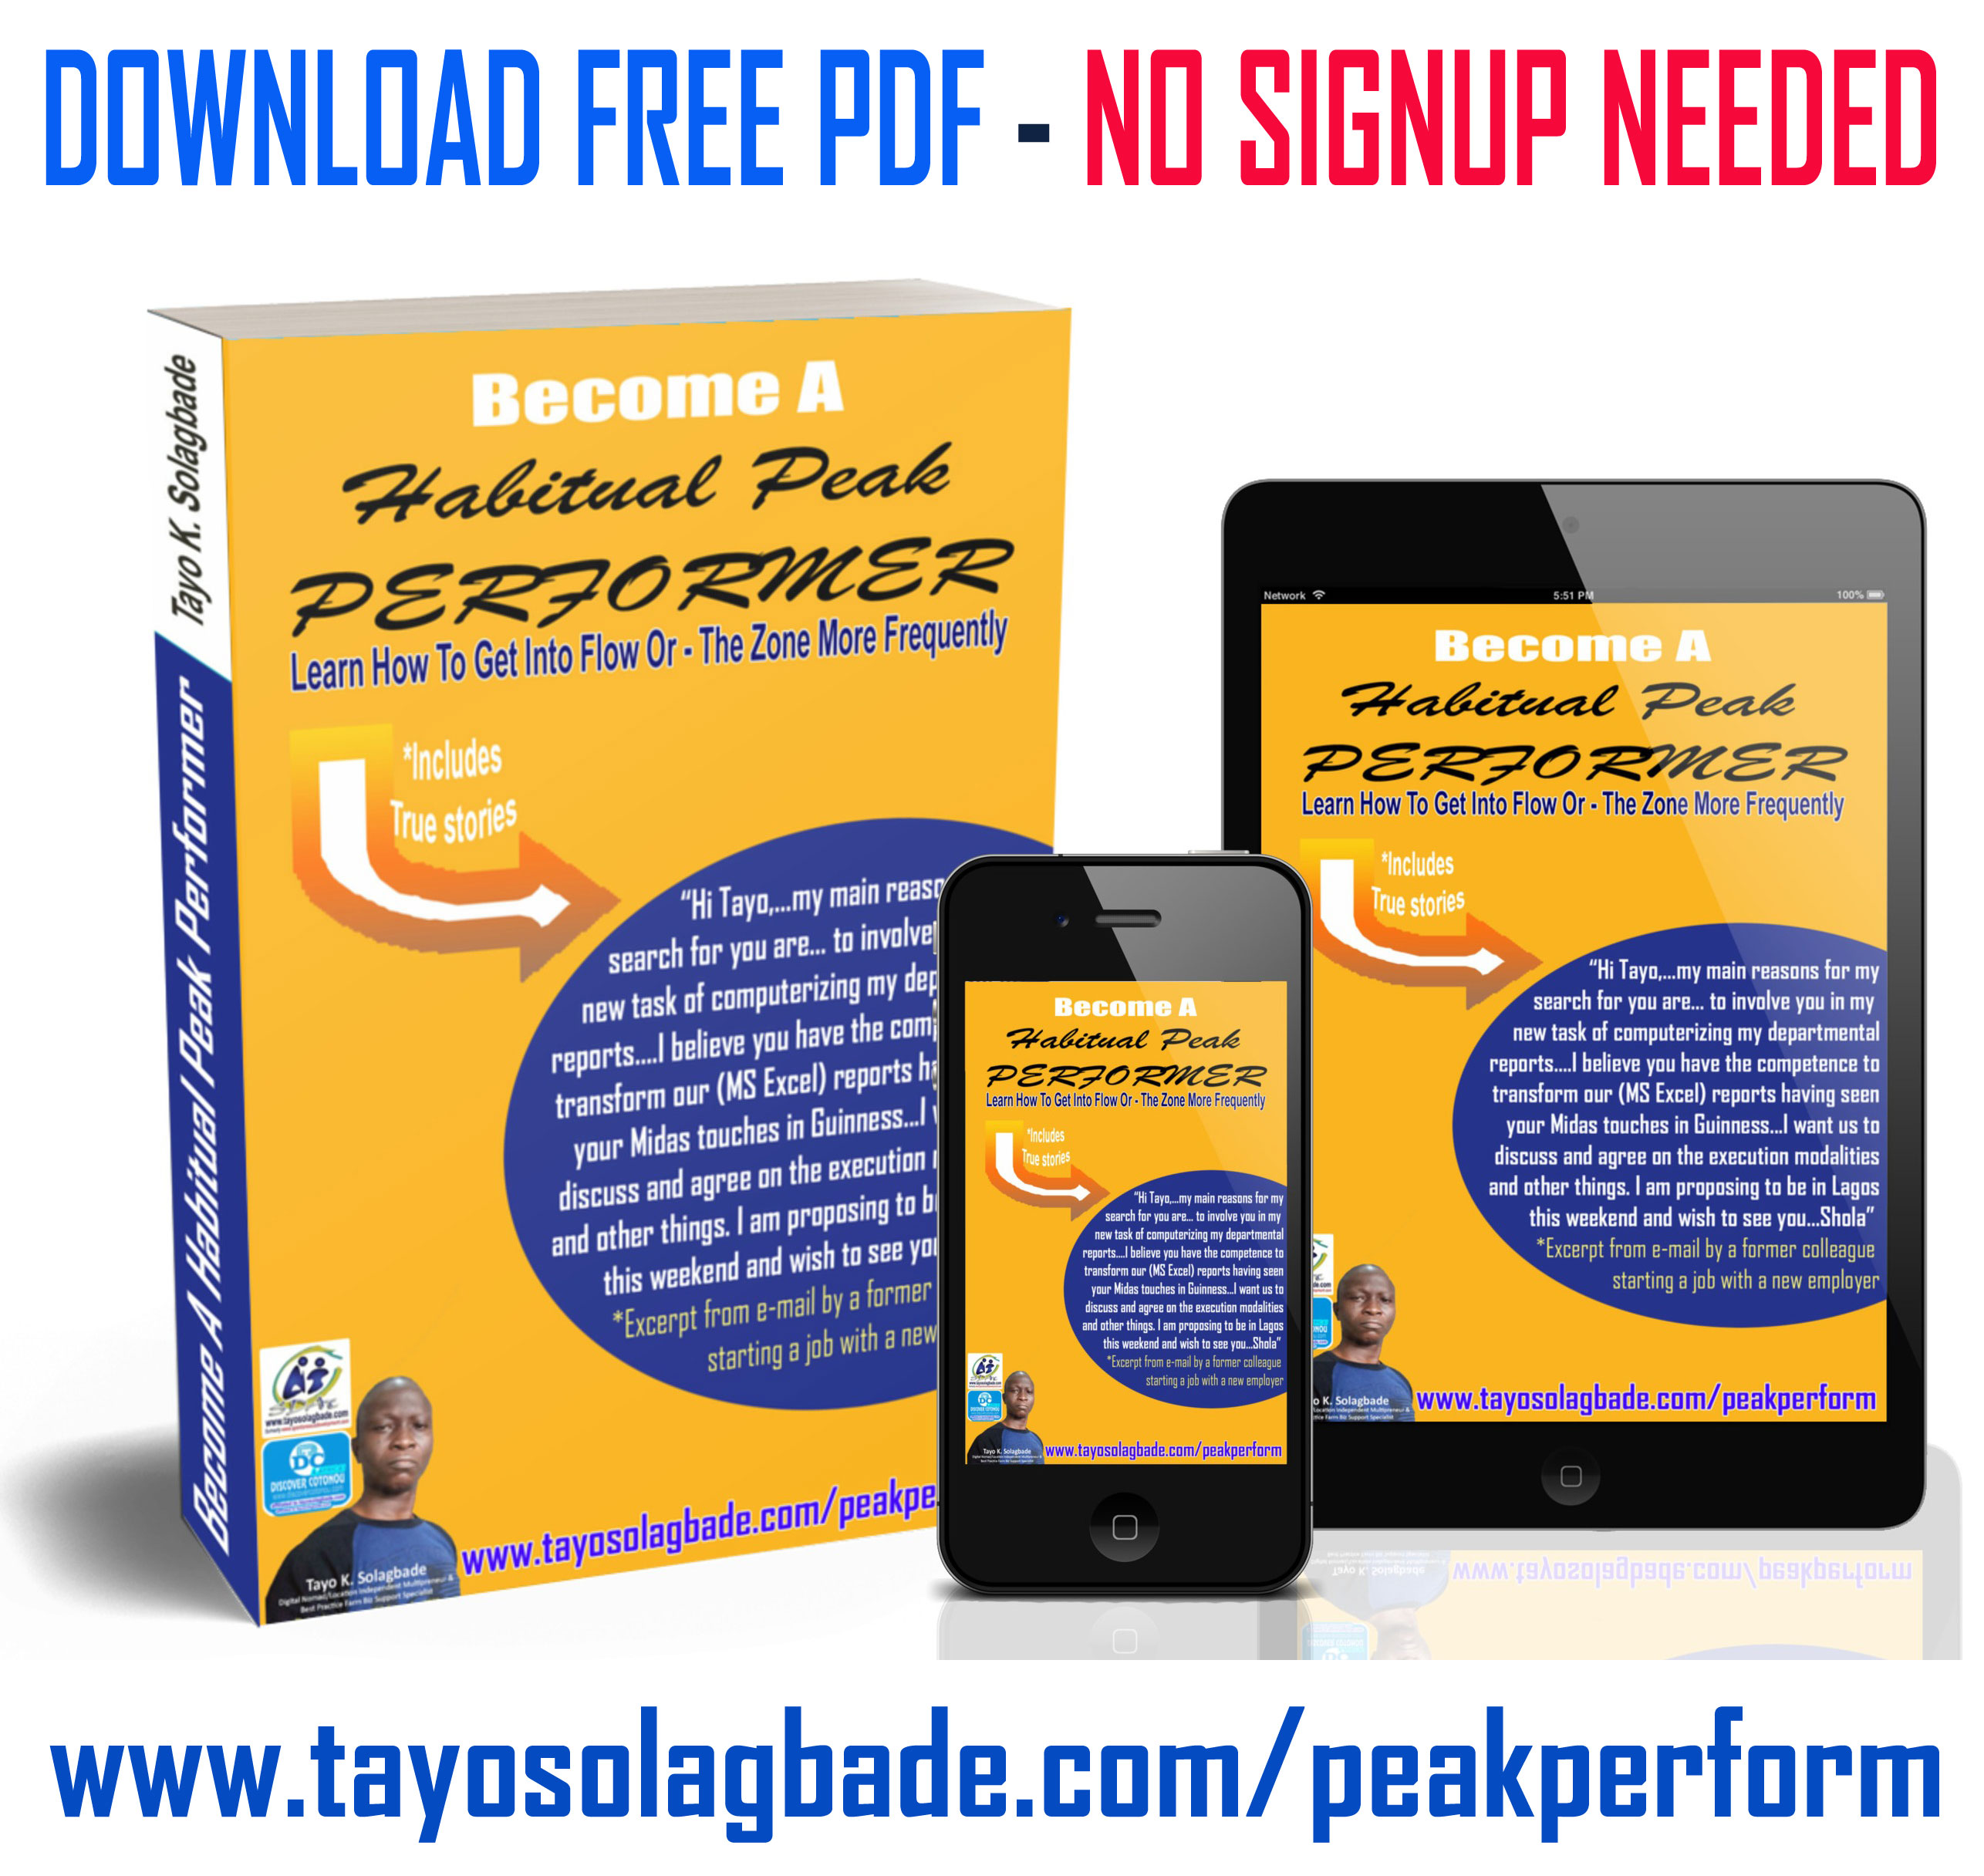 [FREE PDF] Become A Habitual Peak Performer – Learn How To Get Into Flow Or – The Zone More Frequently